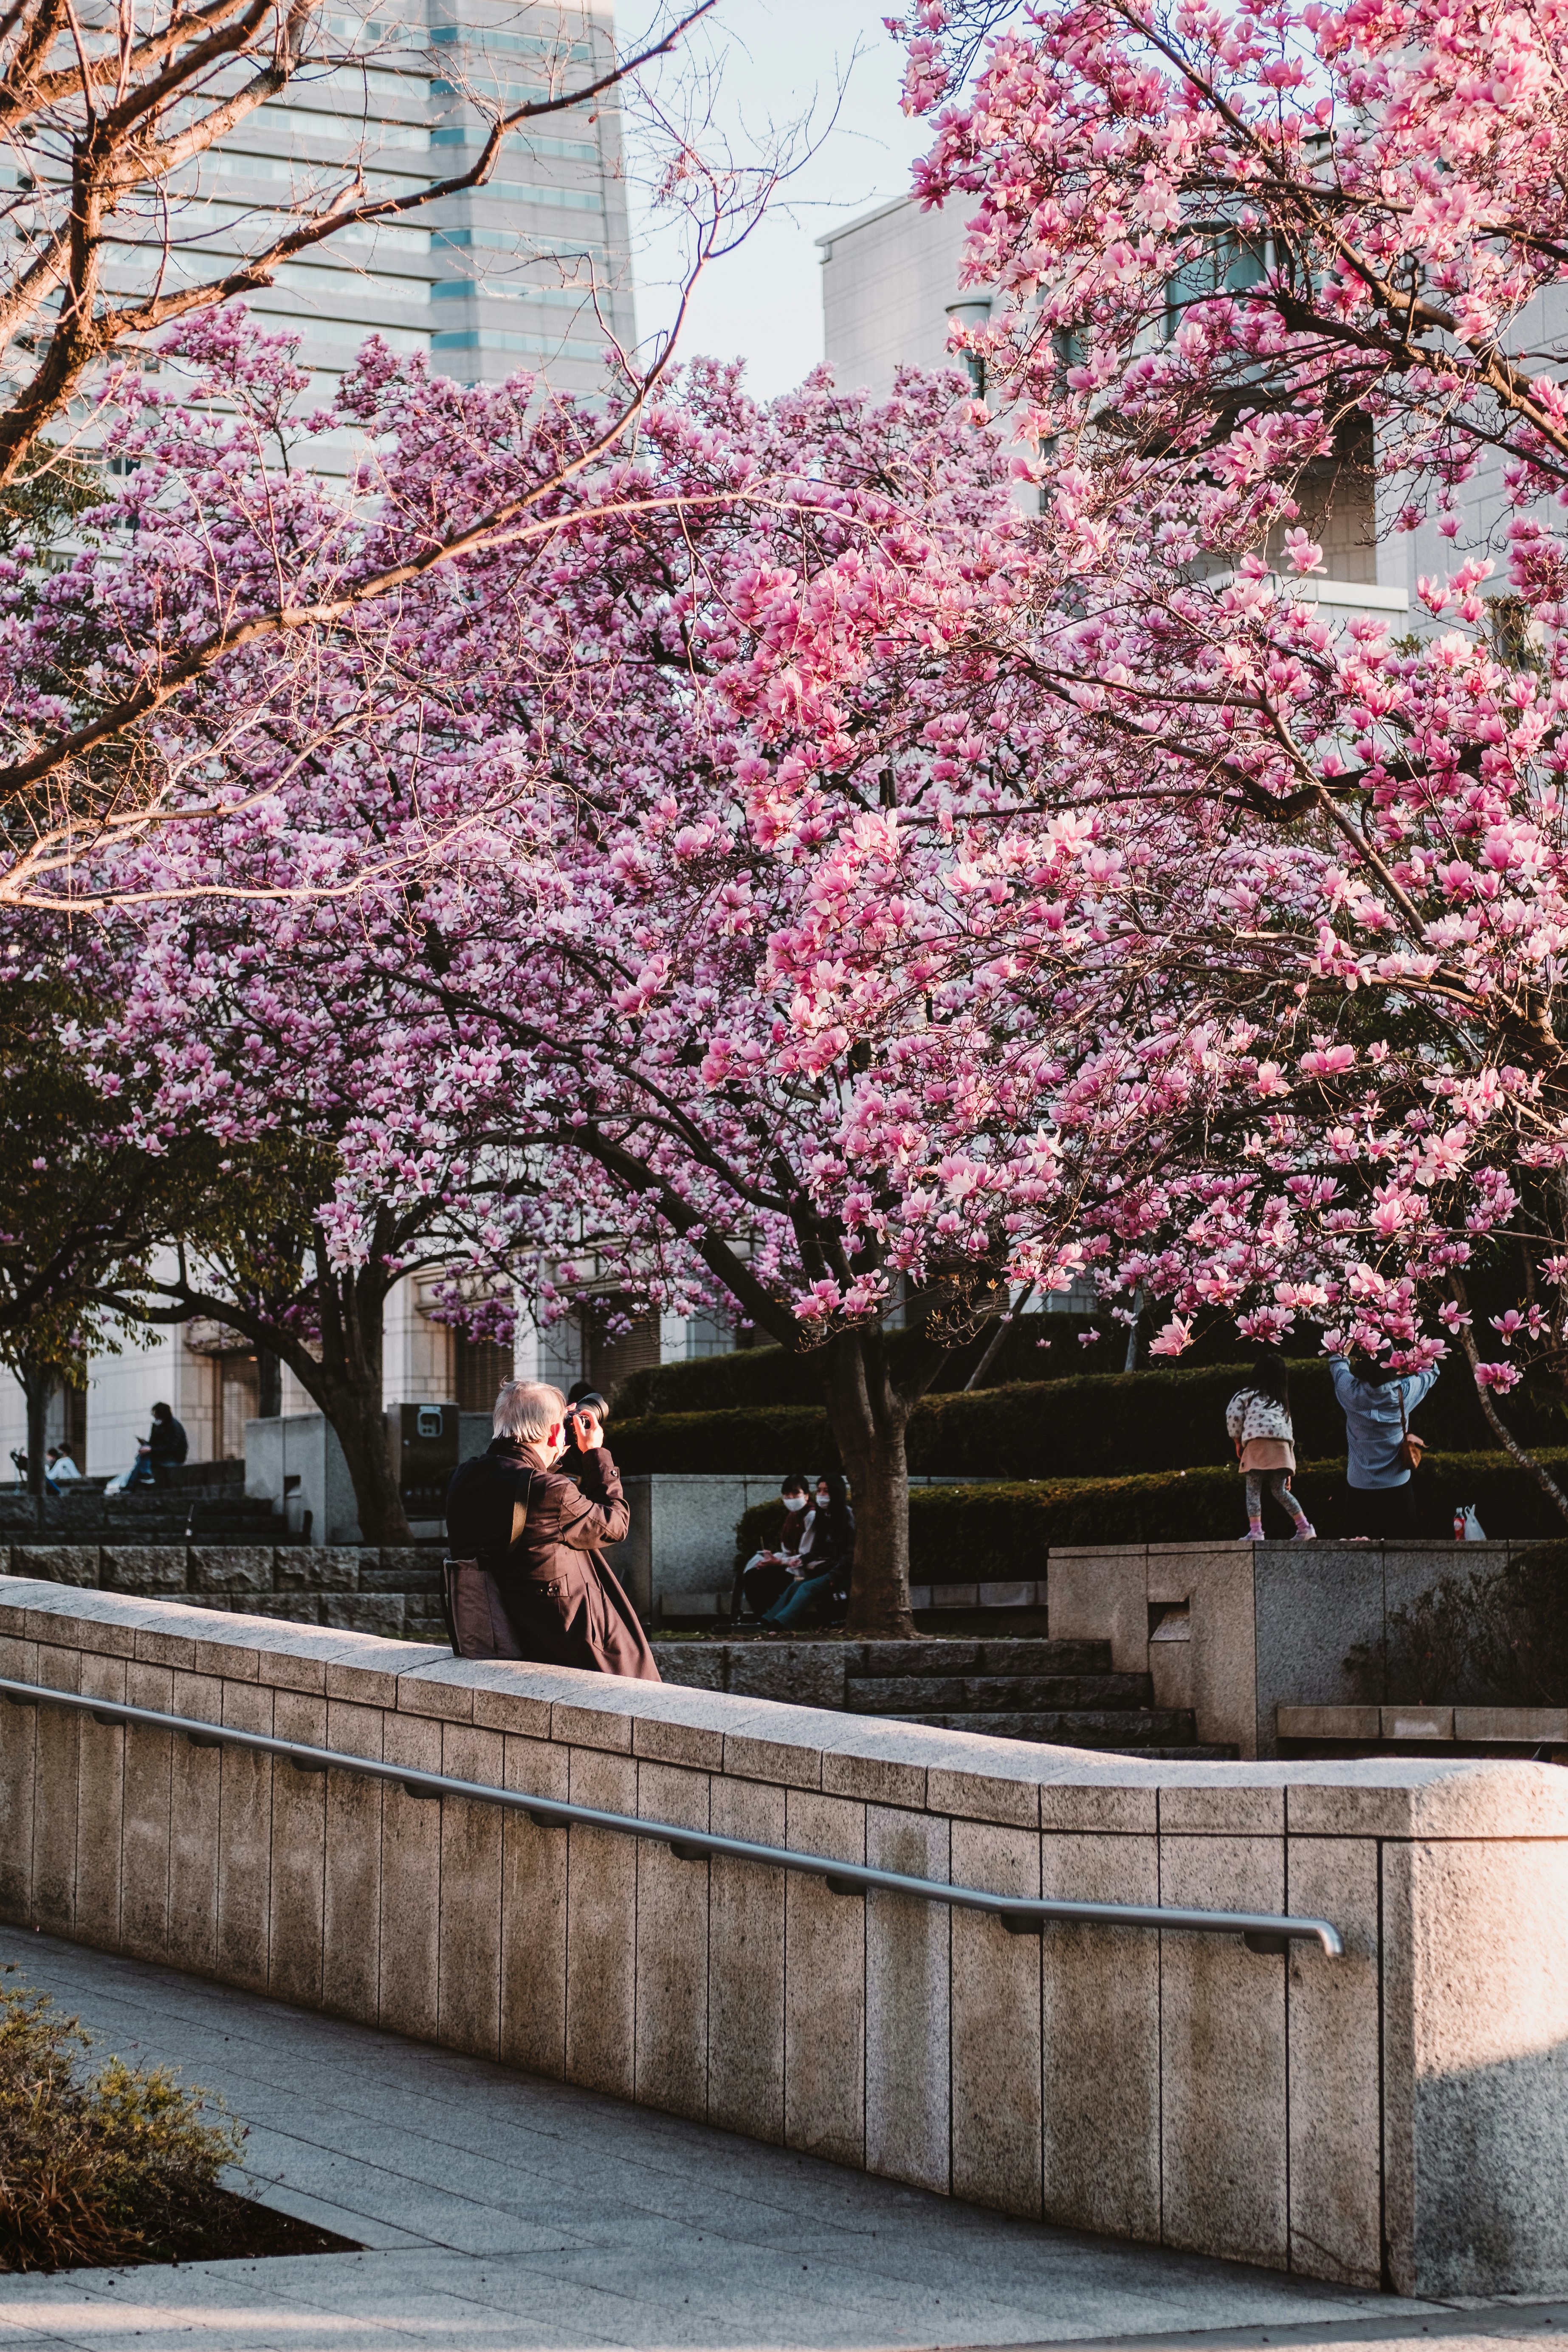 man and woman sitting on concrete bench under pink cherry blossom tree during daytime